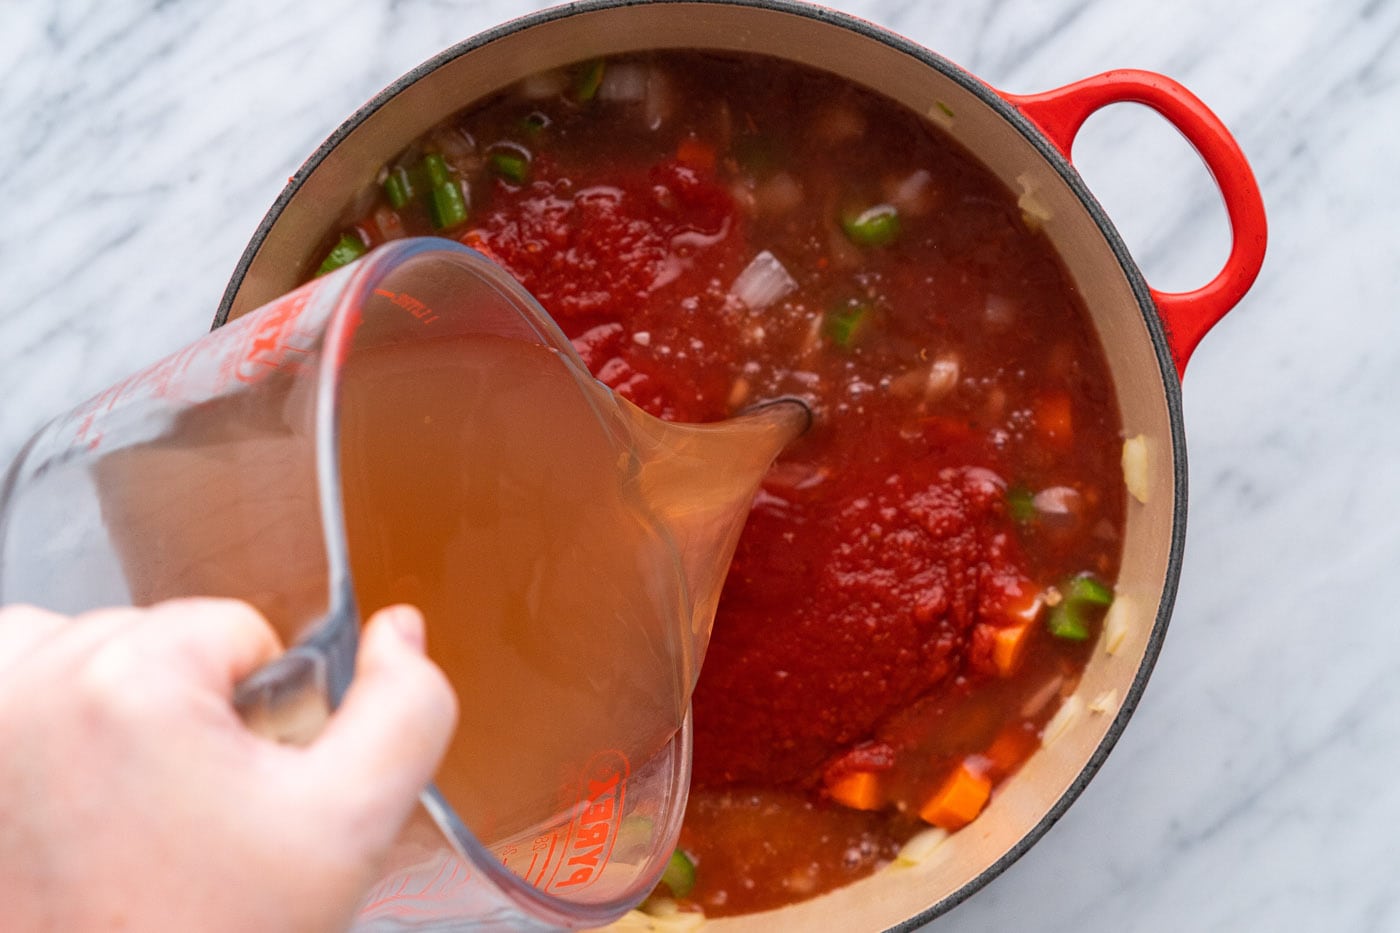 pouring vegetable broth over diced tomatoes, celery, onion, and carrot